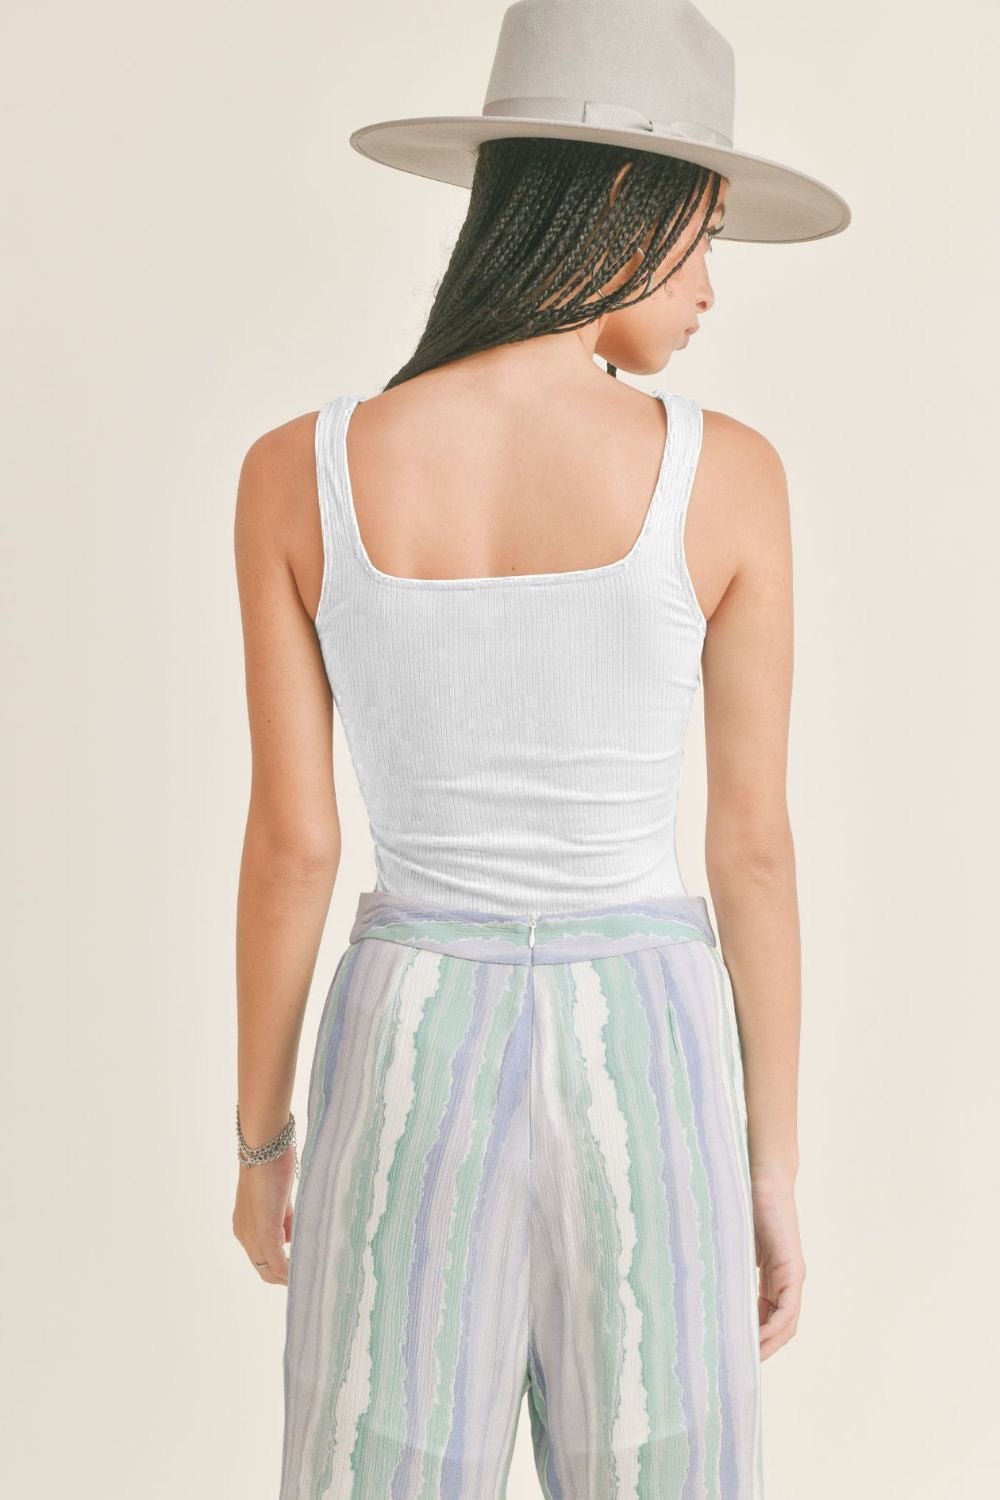 Sage The Label | Square Neck Ribbed Bodysuit Tank | White - Women's Shirts & Tops - Blooming Daily